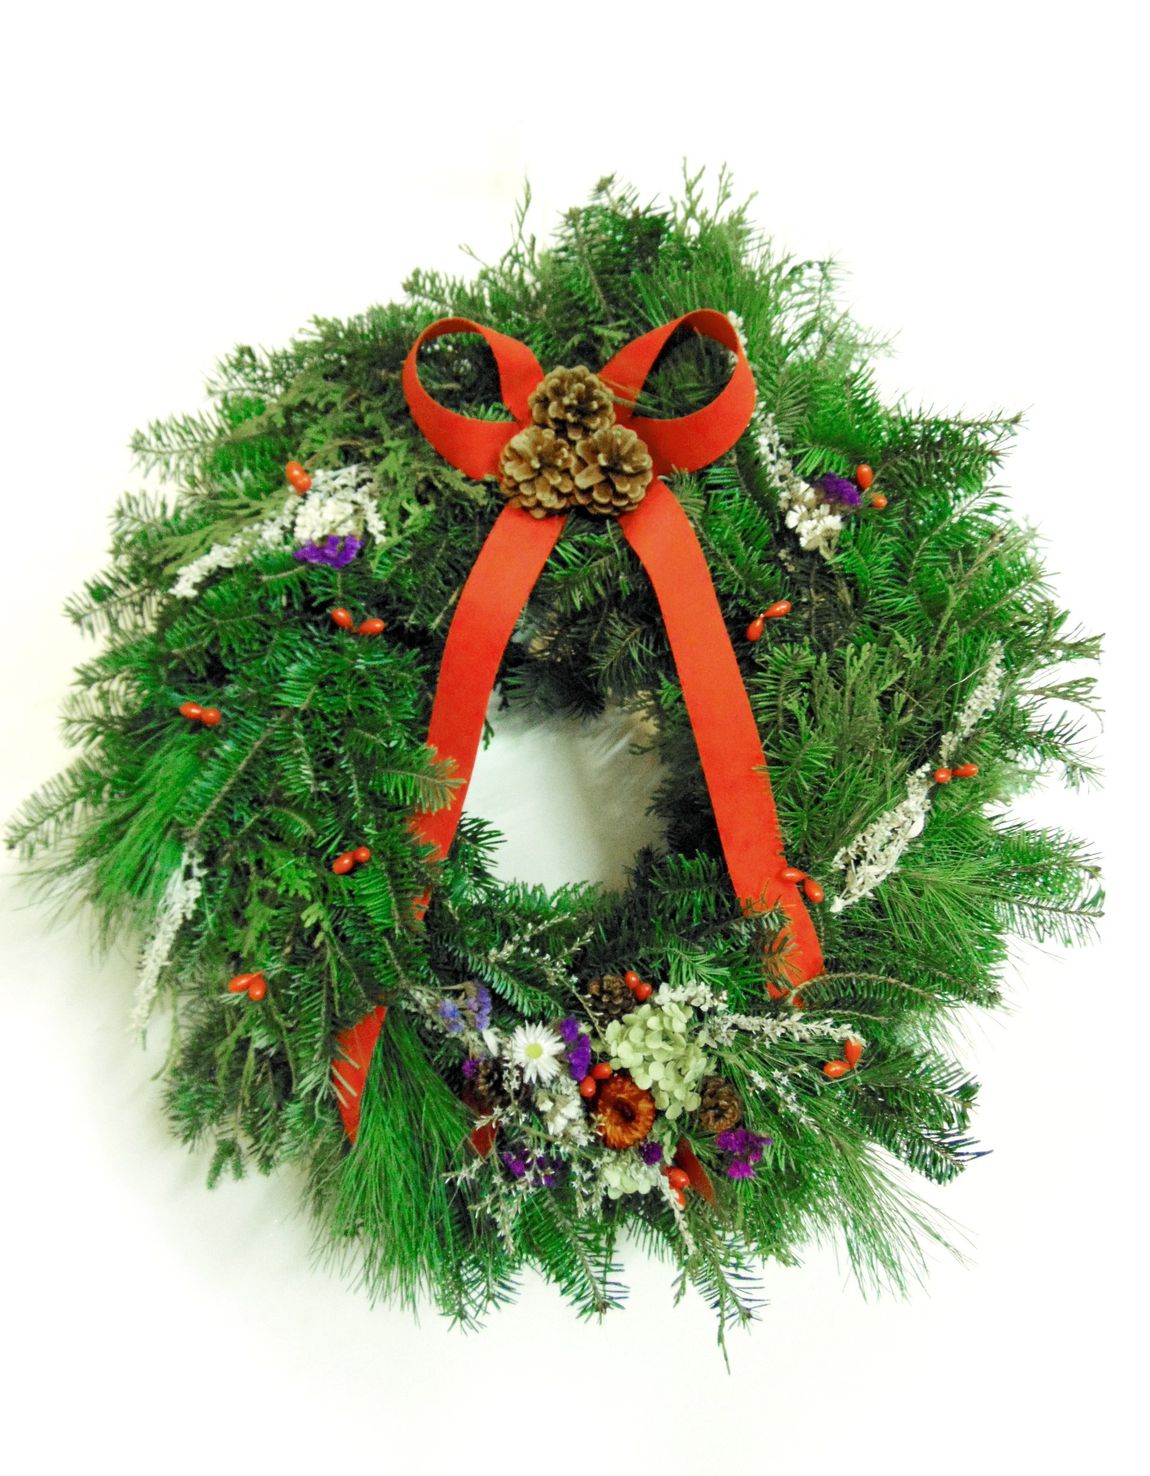 Vermont hand crafted wreaths with white, purple, and red flowers, white sprigs, and red ribbons